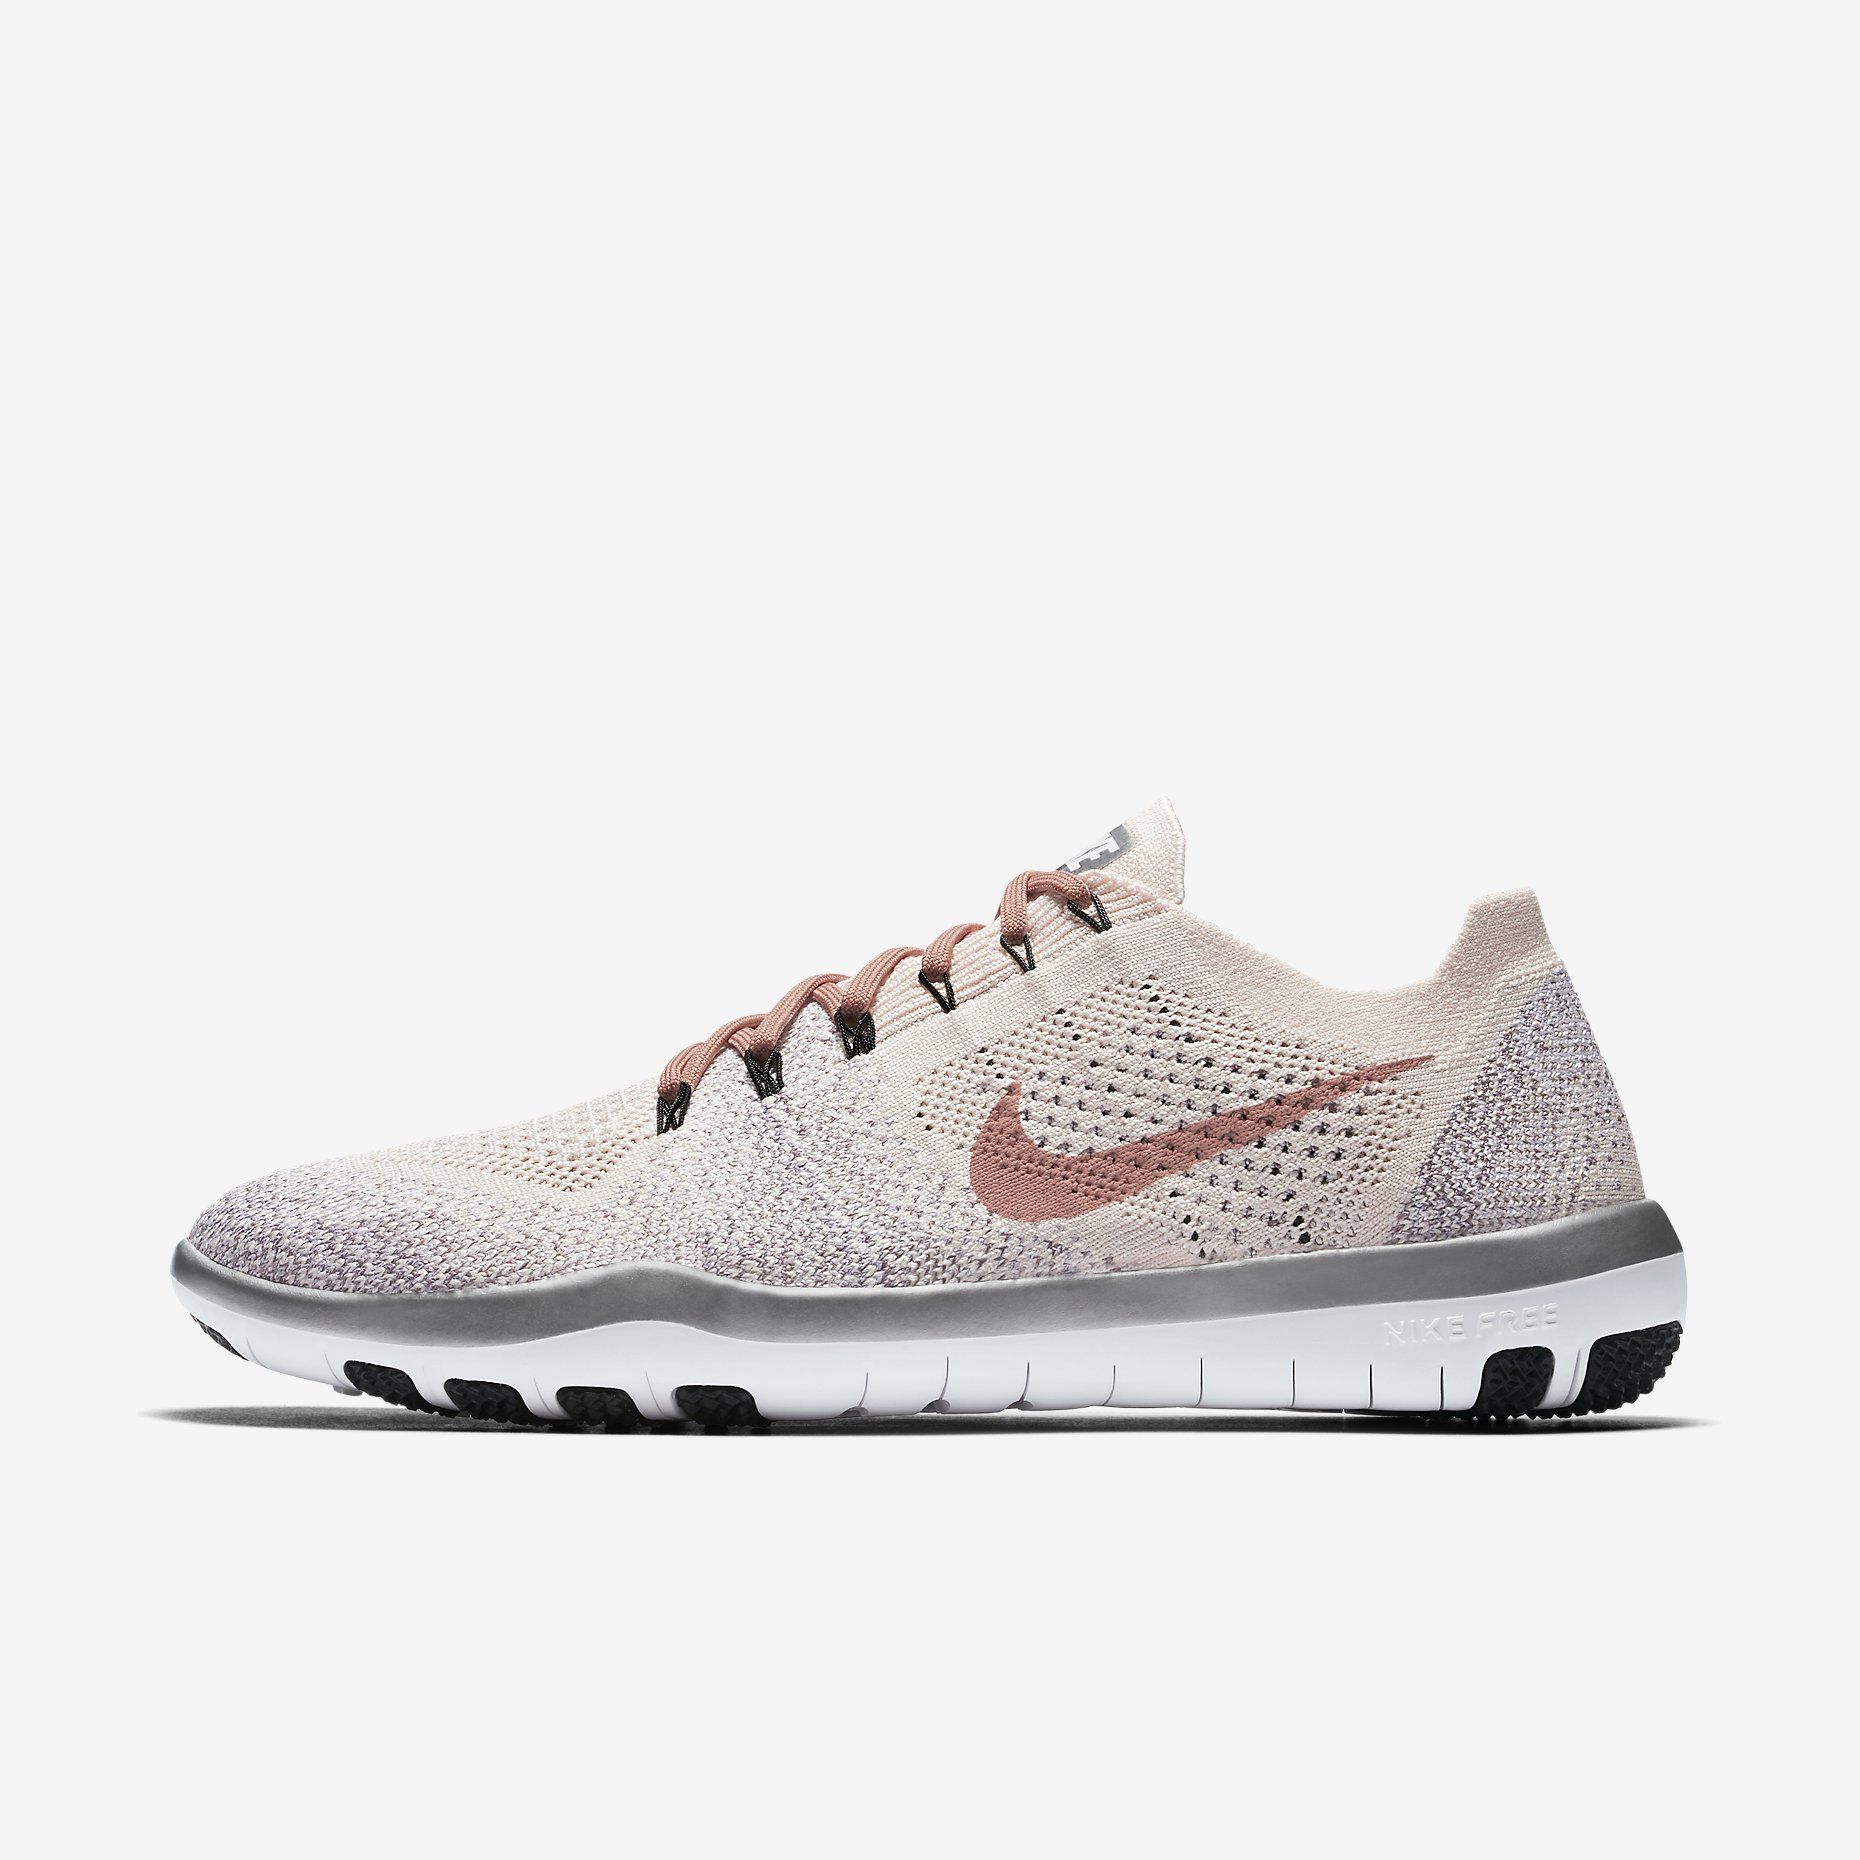 Tratar Laos Máxima Nike's New Millennial Pink Collection — Pink Shoes and Clothing by Nike